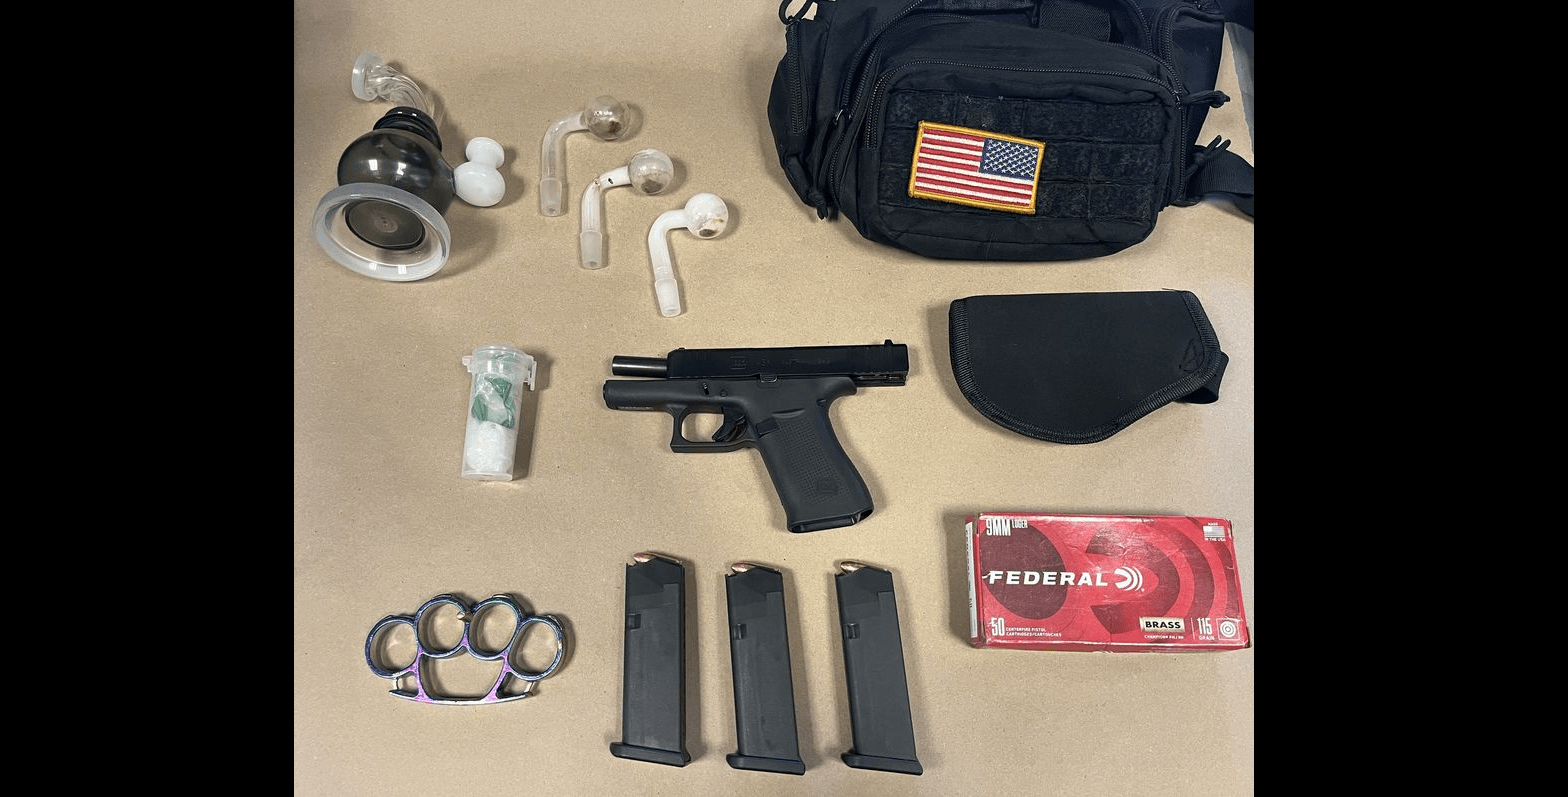 items-confiscated-from-auddie-and-misty-schrack-santa-rosa-police